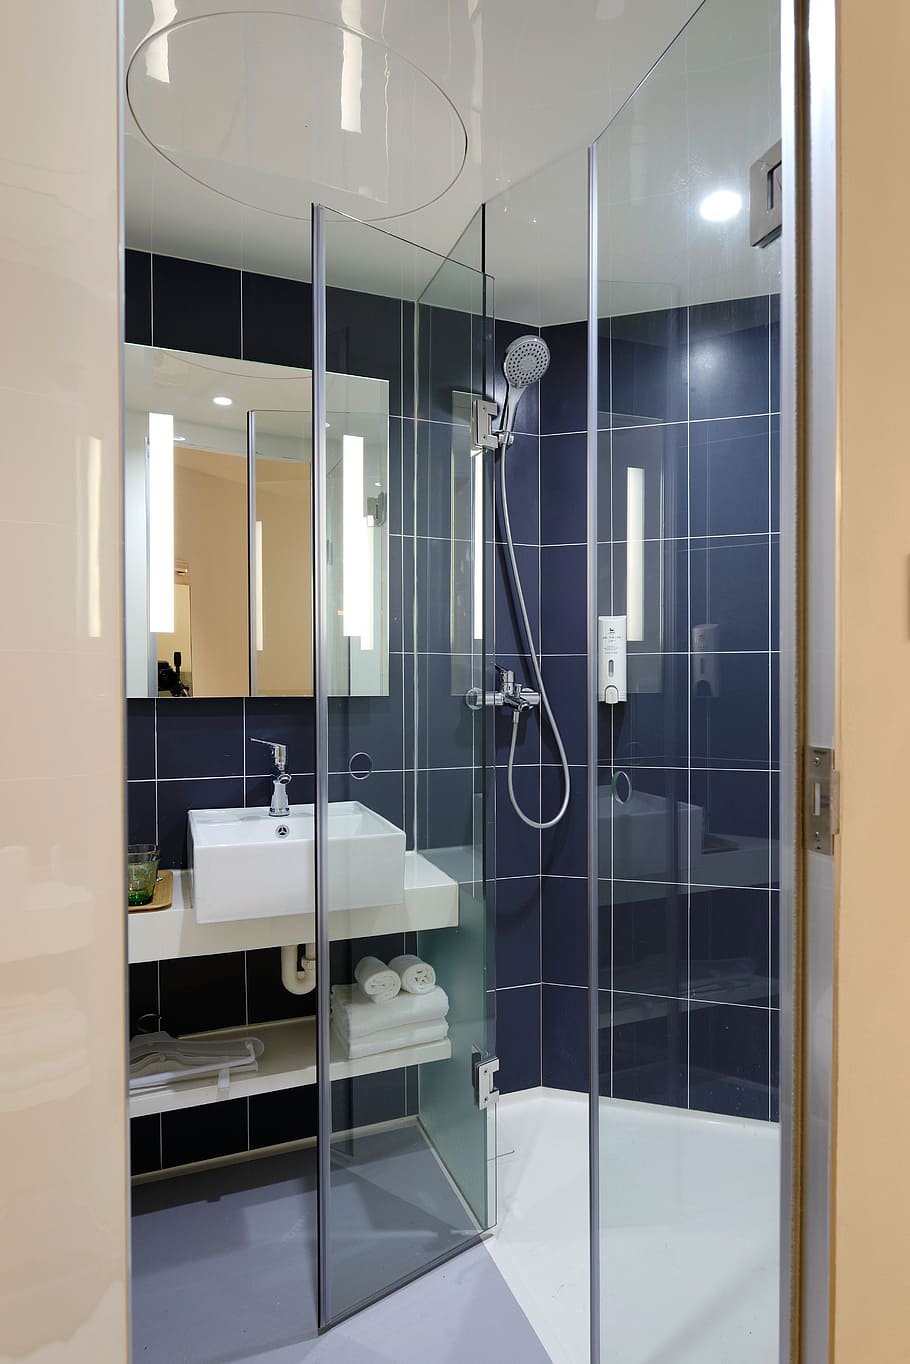 clear, glass shower stall, hotel, guest room, new, bathroom, modern, indoors, domestic room, domestic bathroom